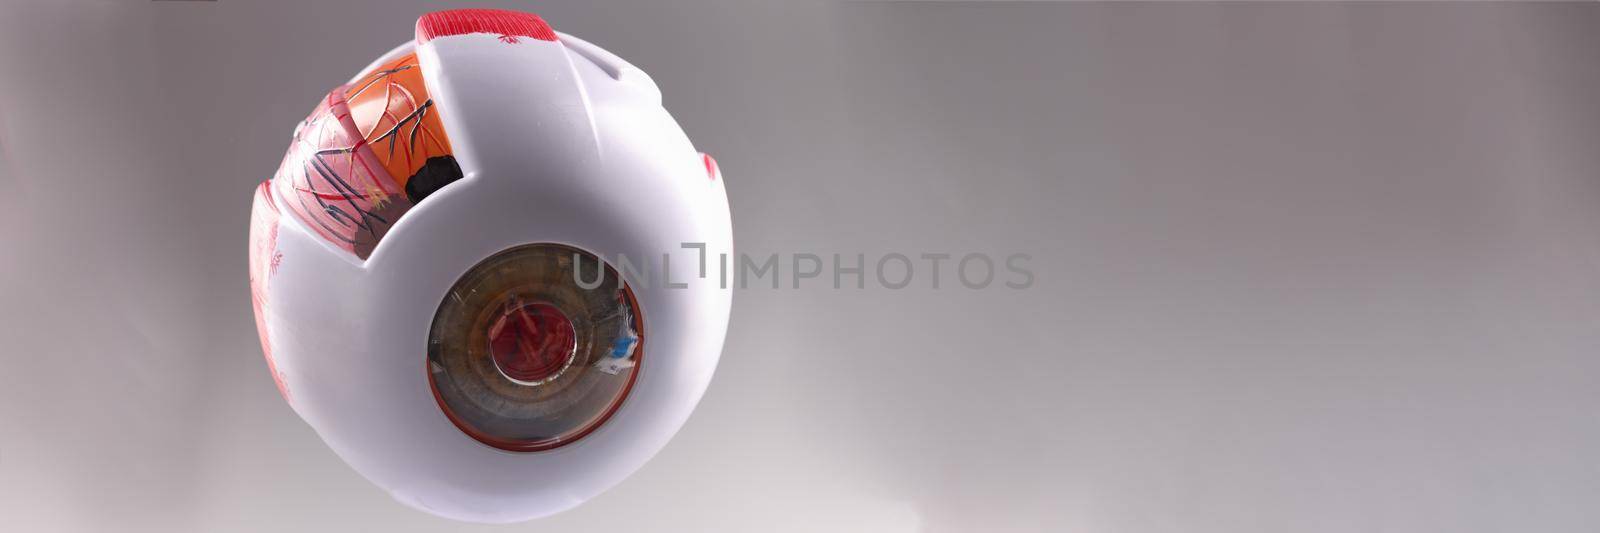 Artificial model of human eye on gray background. Ophthalmology concept